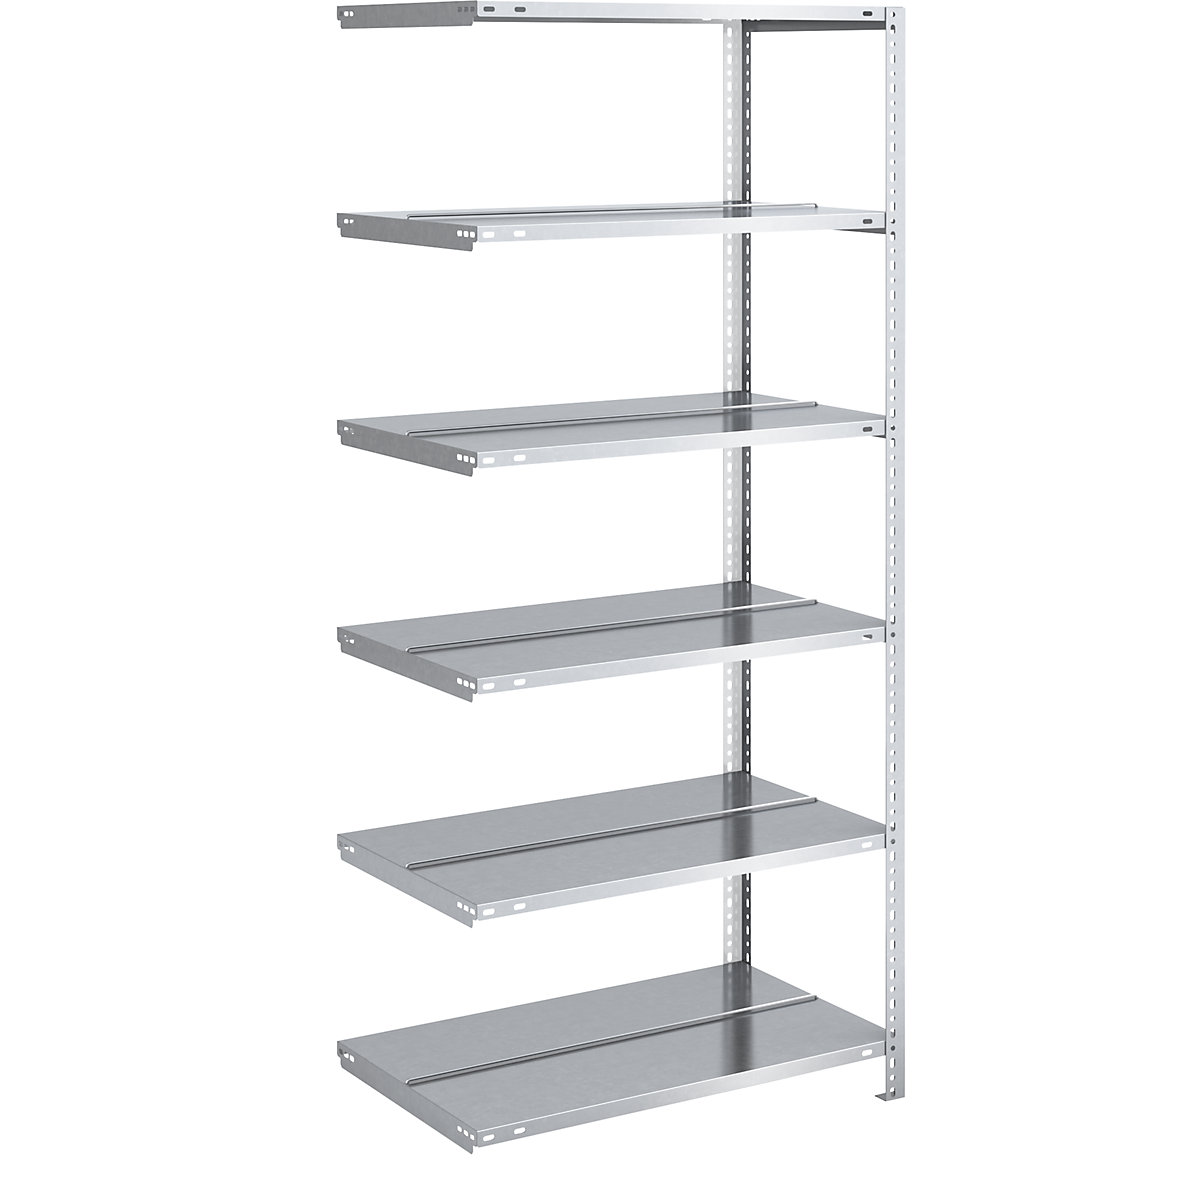 Bolt-together archive shelving, zinc plated – hofe, shelf height 1850 mm, double sided, extension shelf, width x depth 750 x 600 mm-3